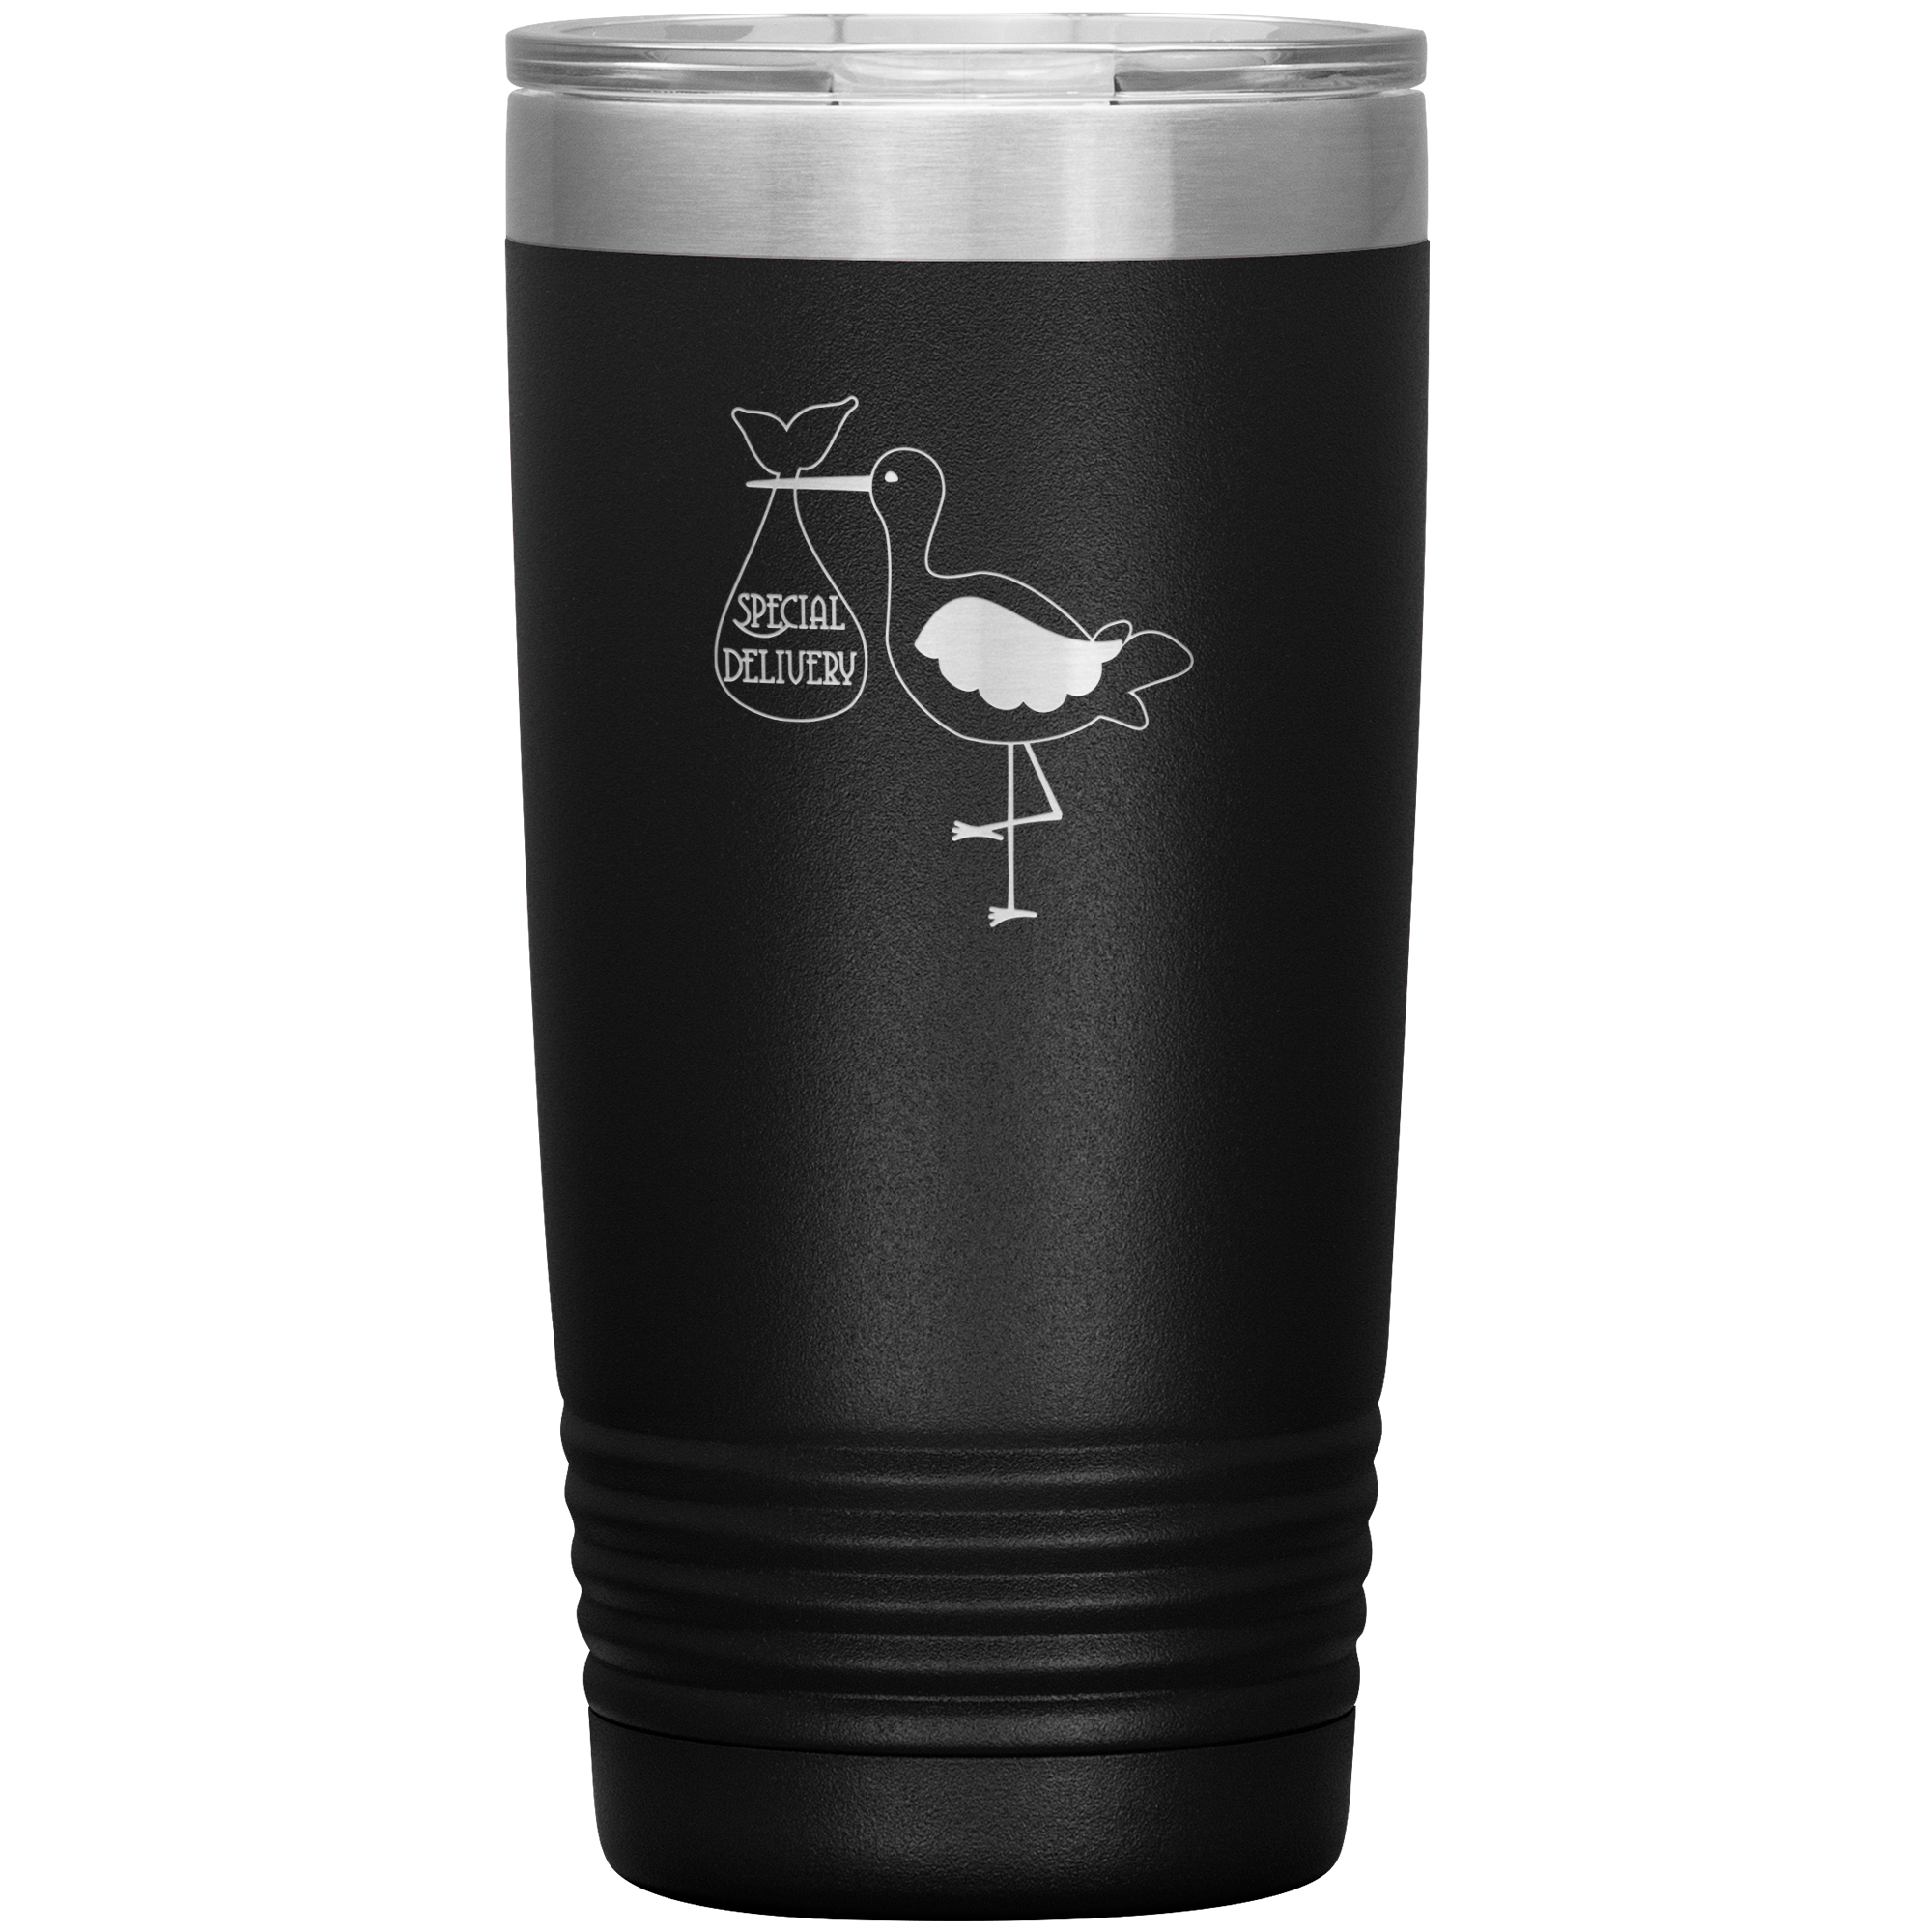 Special delivery stork 20 oz stainless steel Vacuum insulated hot and cold beverage Tumbler